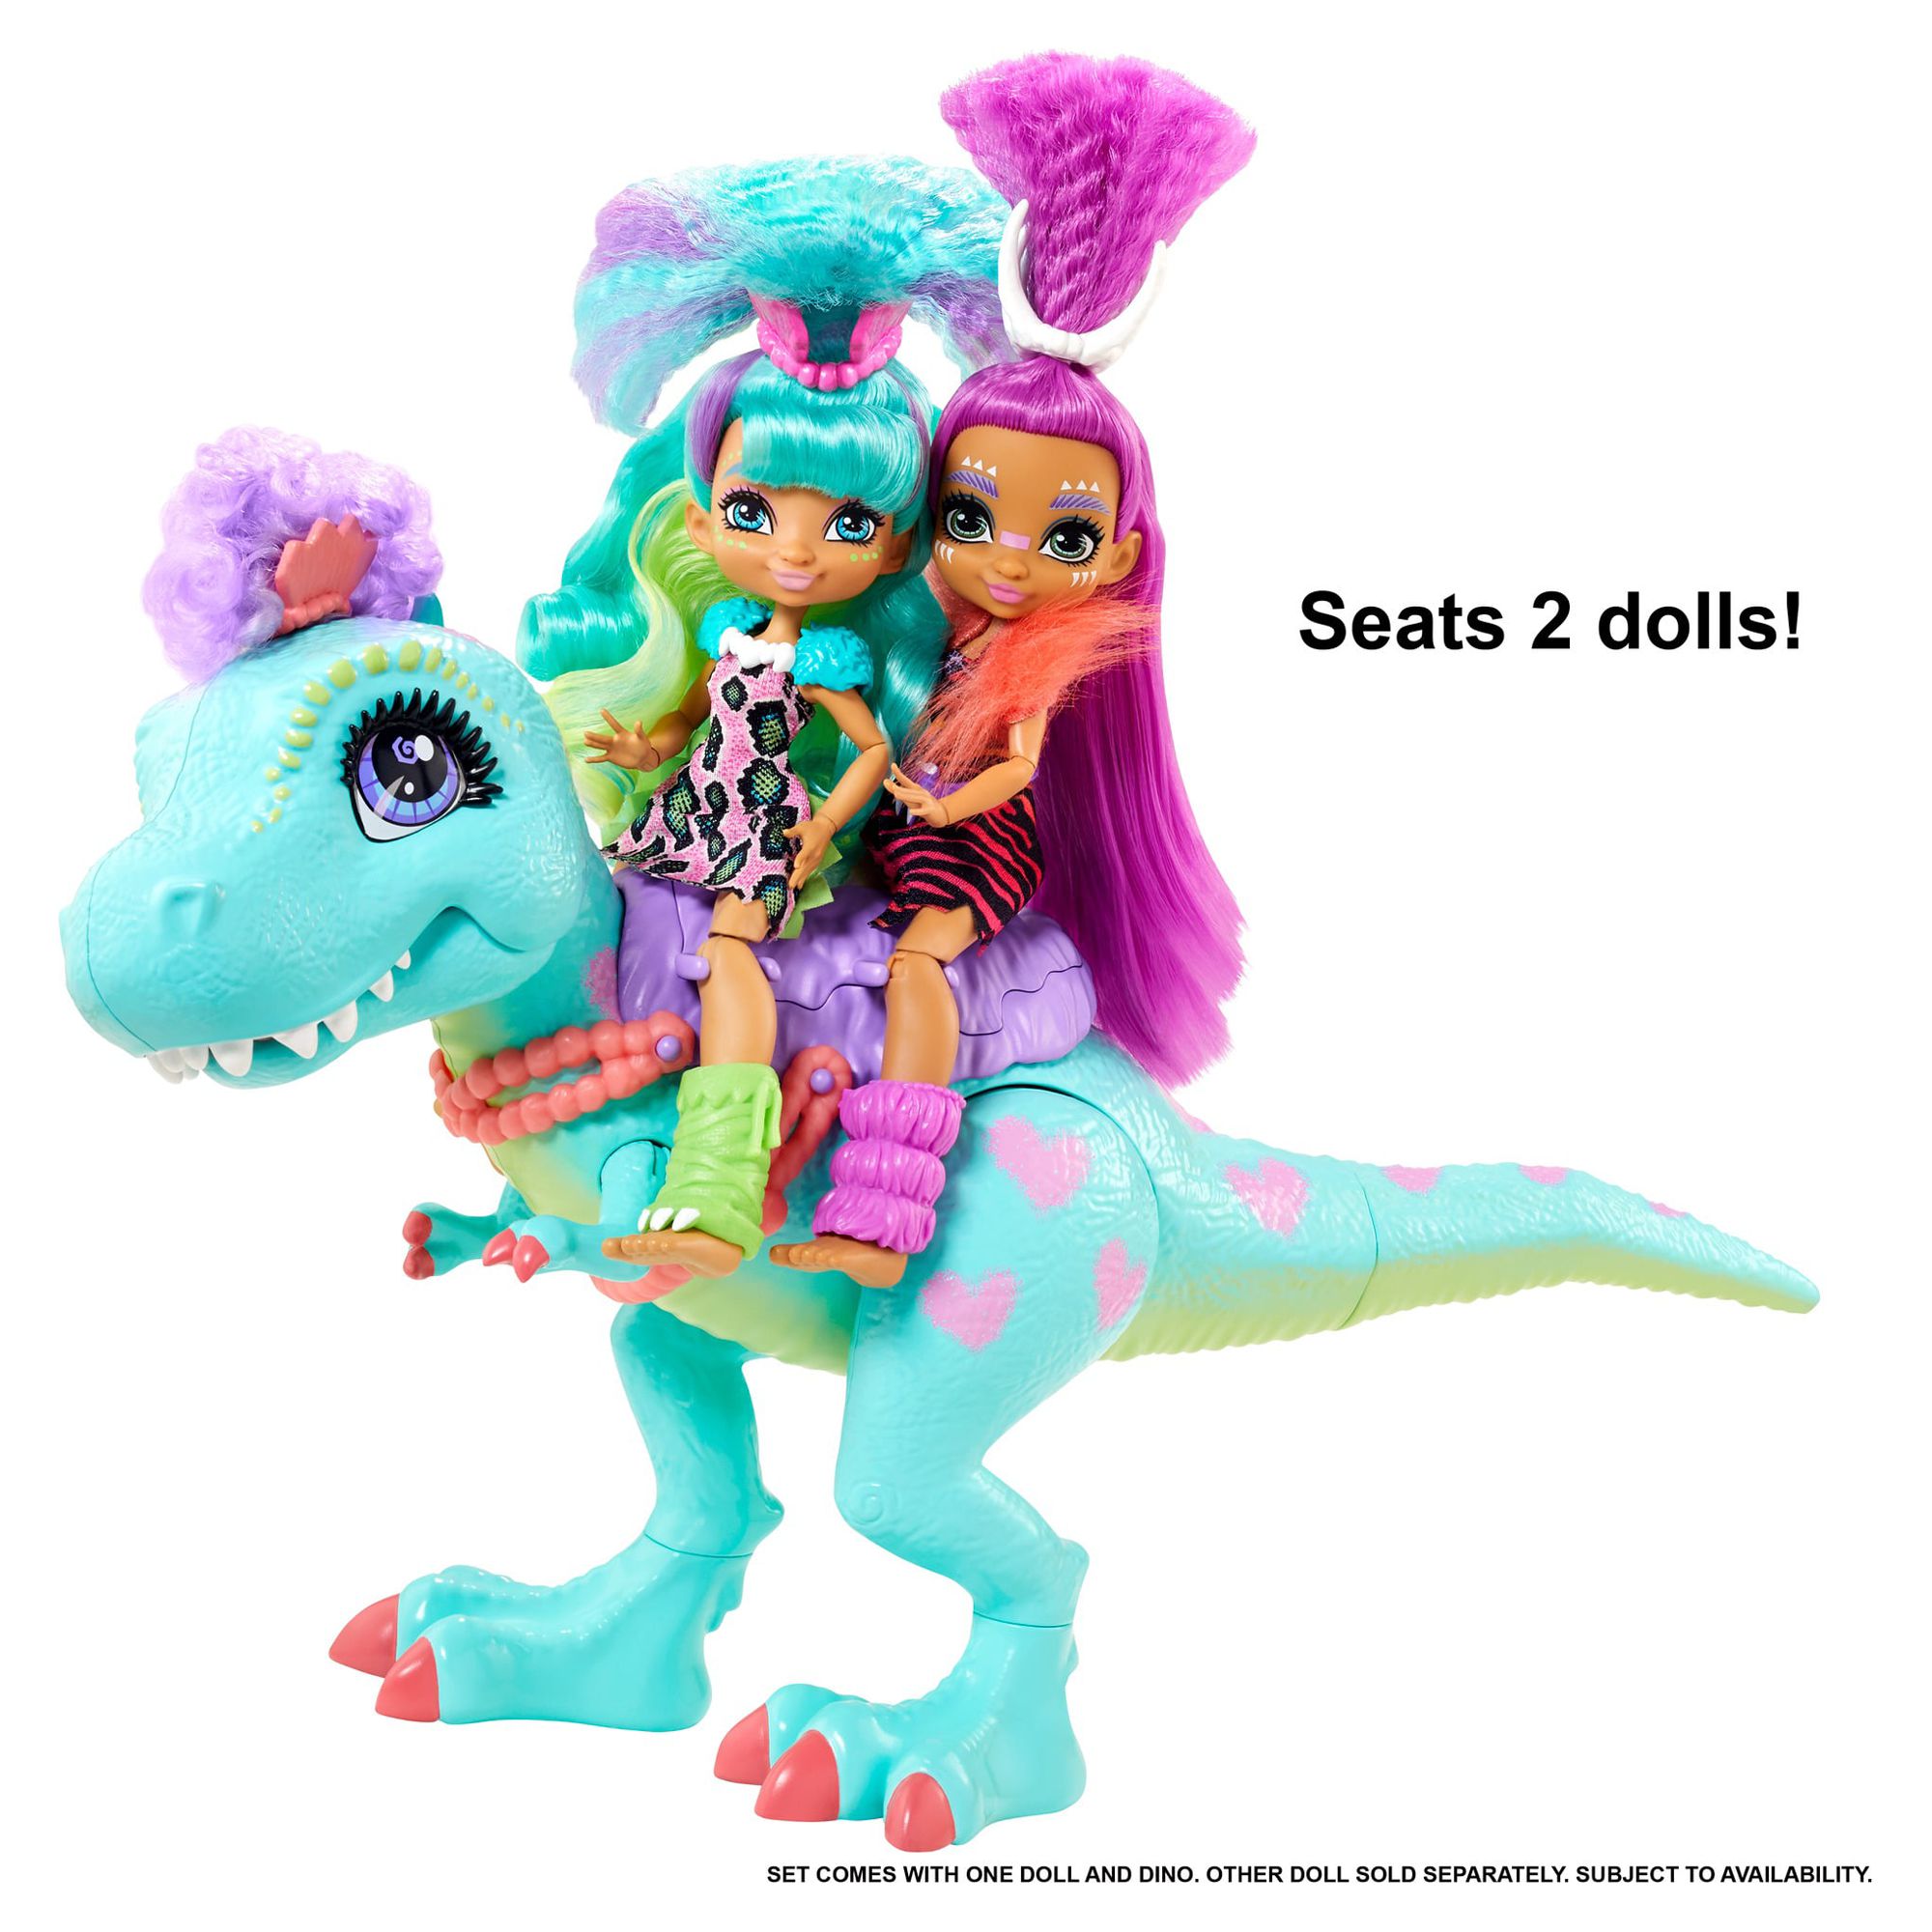 Cave Club Rockelle Doll And Tyrasaurus Dinosaur Playset, For 4 Year Olds And Up - image 4 of 9